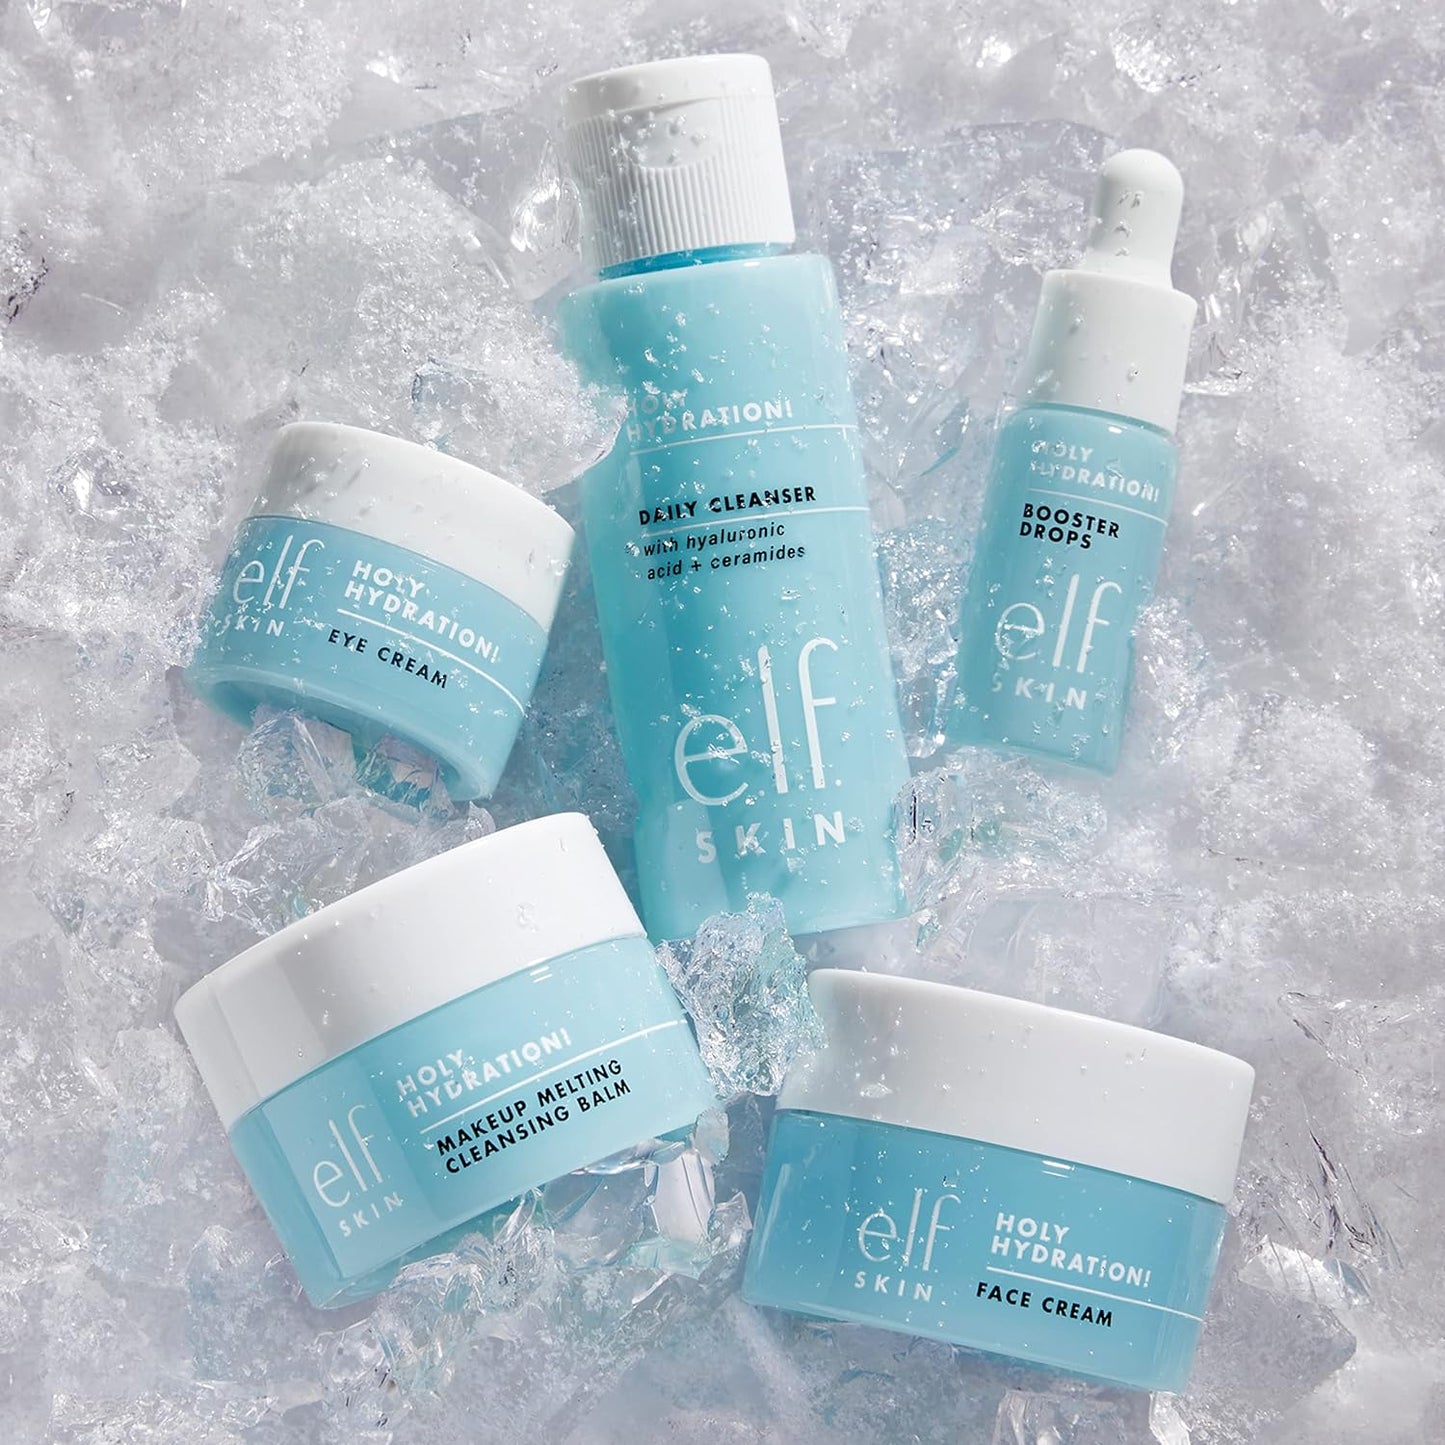 e.l.f. SKIN Hydrated Ever After Skincare Mini Kit, Cleanser, Makeup Remover, Moisturizer & Eye Cream For Hydrating Skin, TSA-friendly Sizes